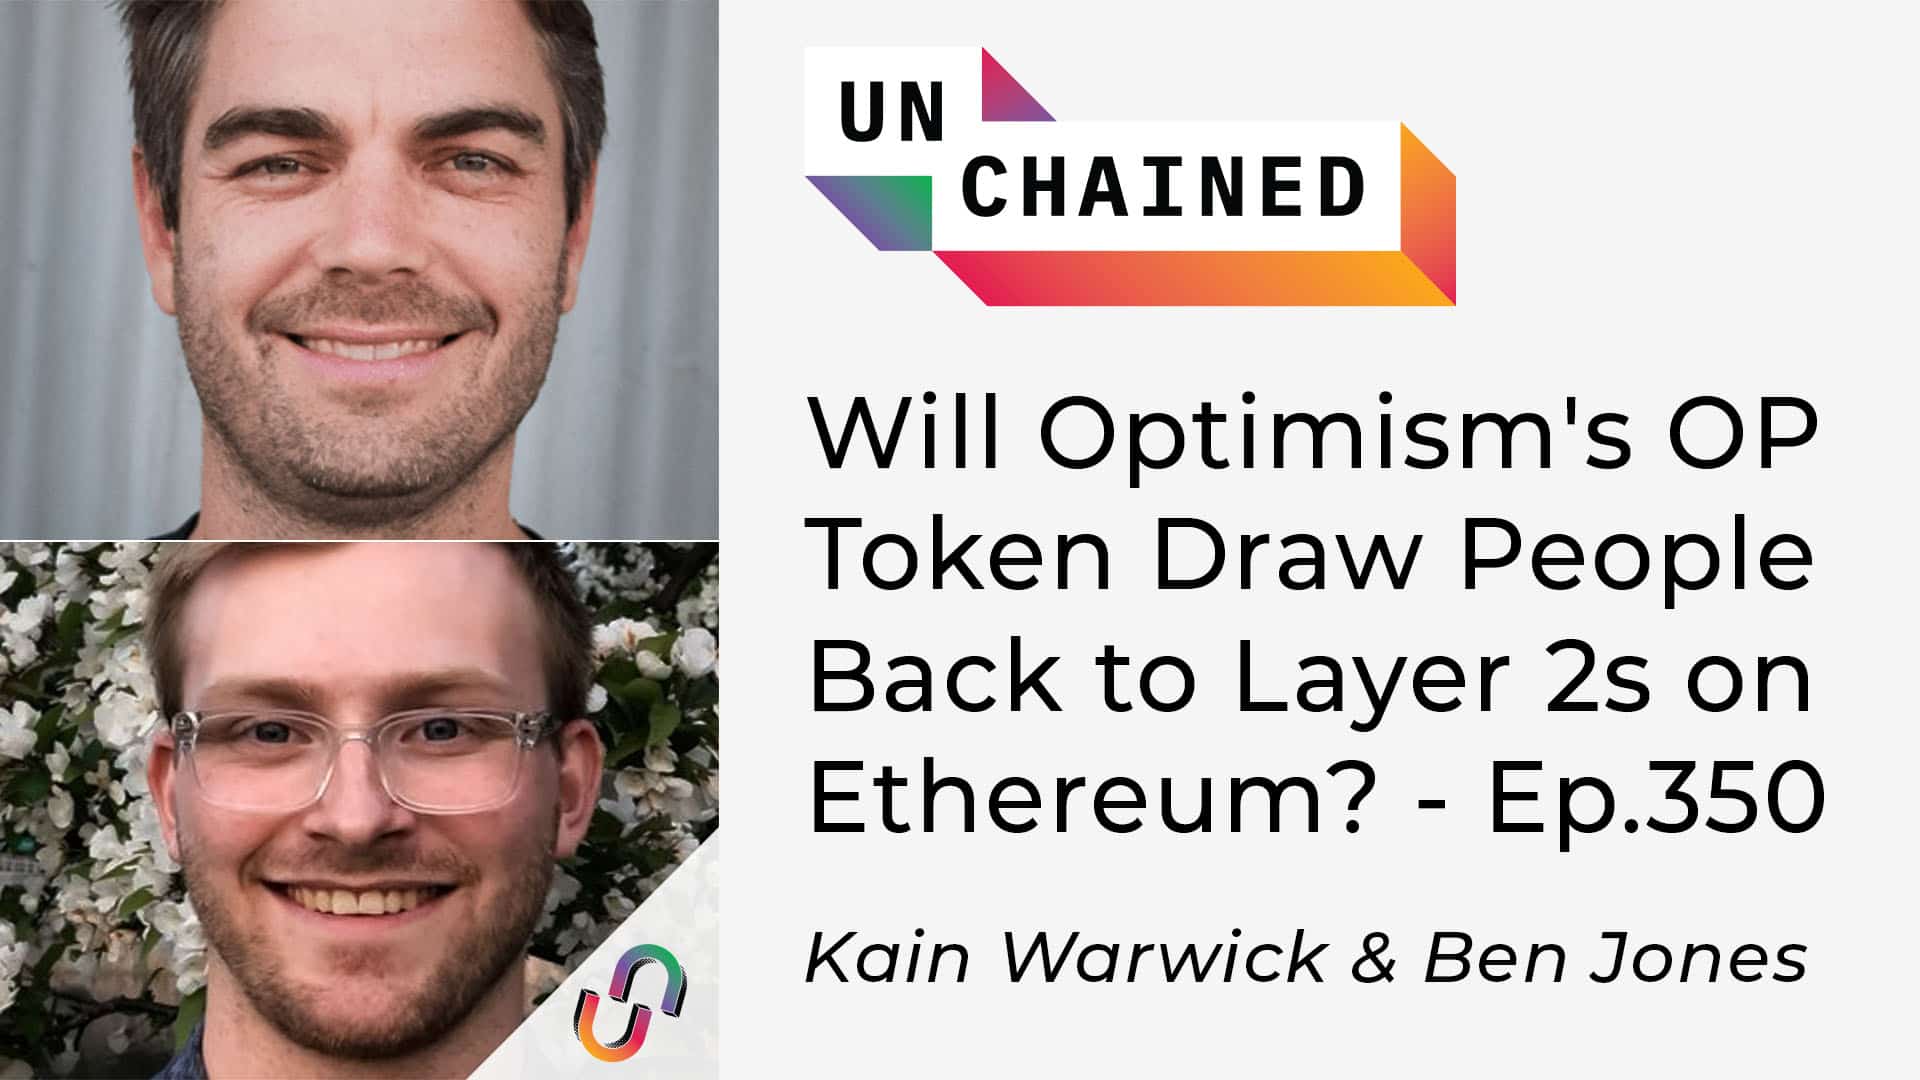 Unchained - Ep.350 - Will Optimism's OP Token Draw People Back to Layer 2s on Ethereum